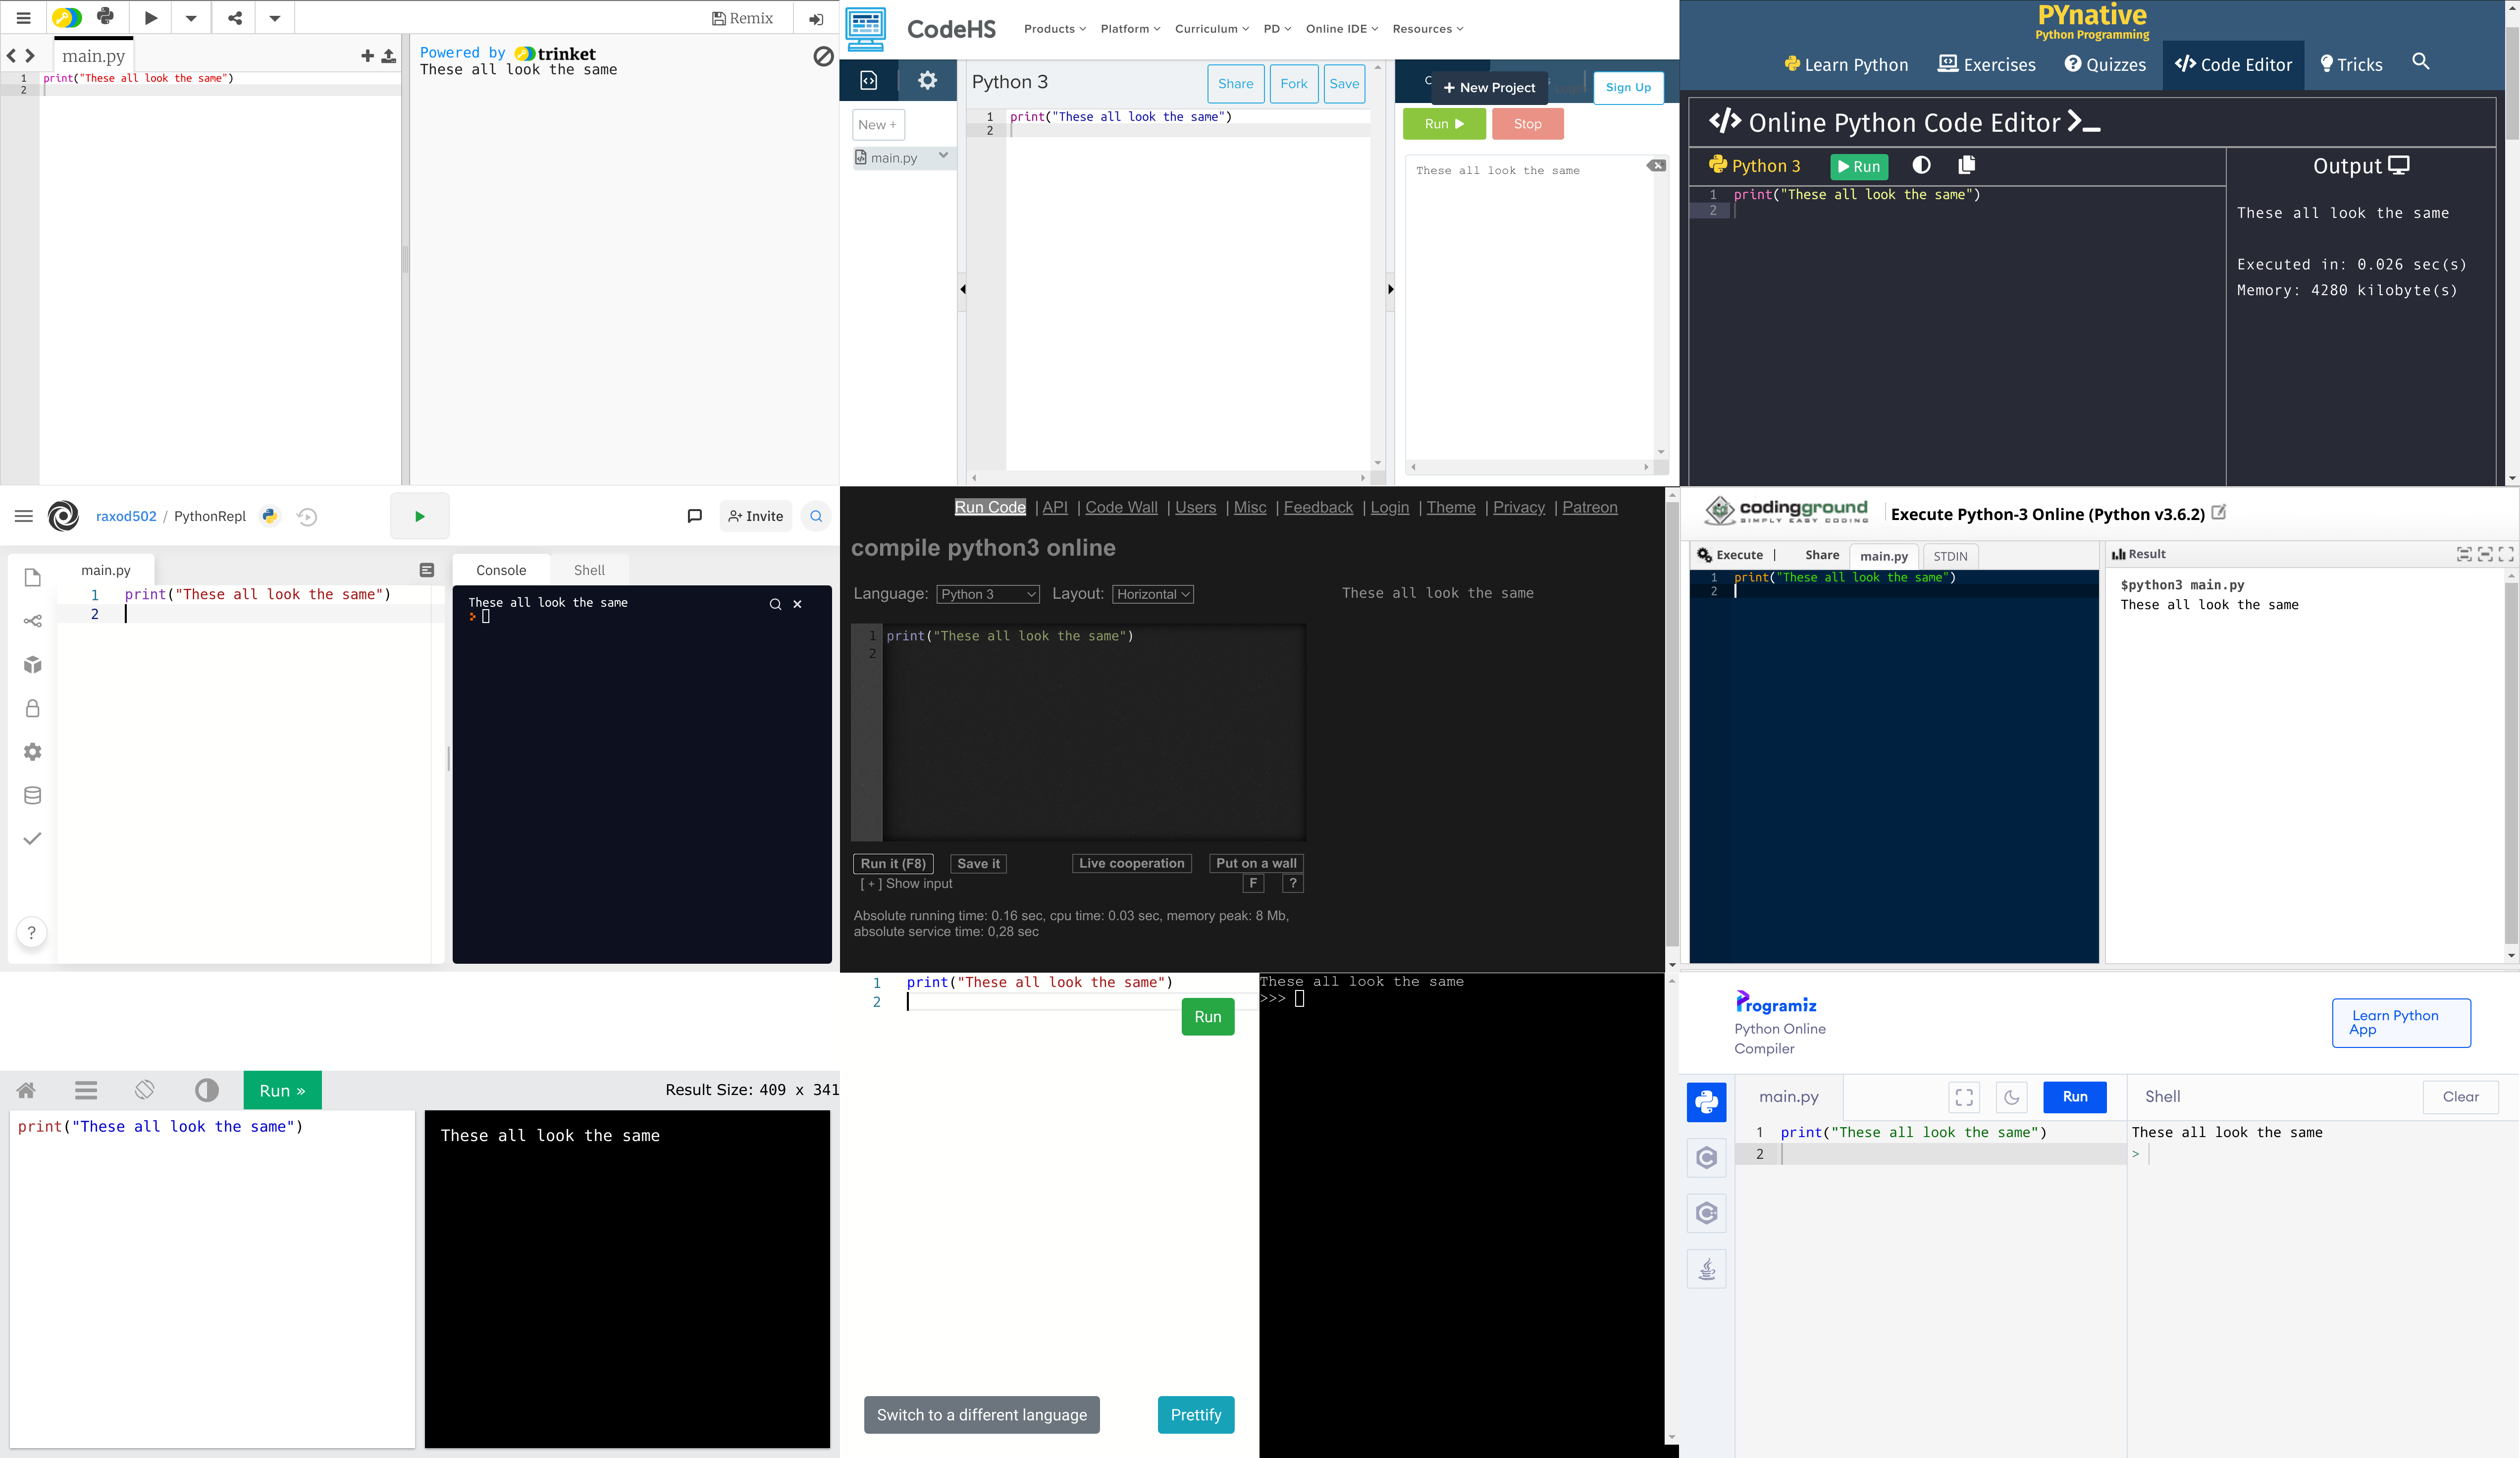 Screenshot of
nine different webapps that let you run Python online, all of which
look more or less identical